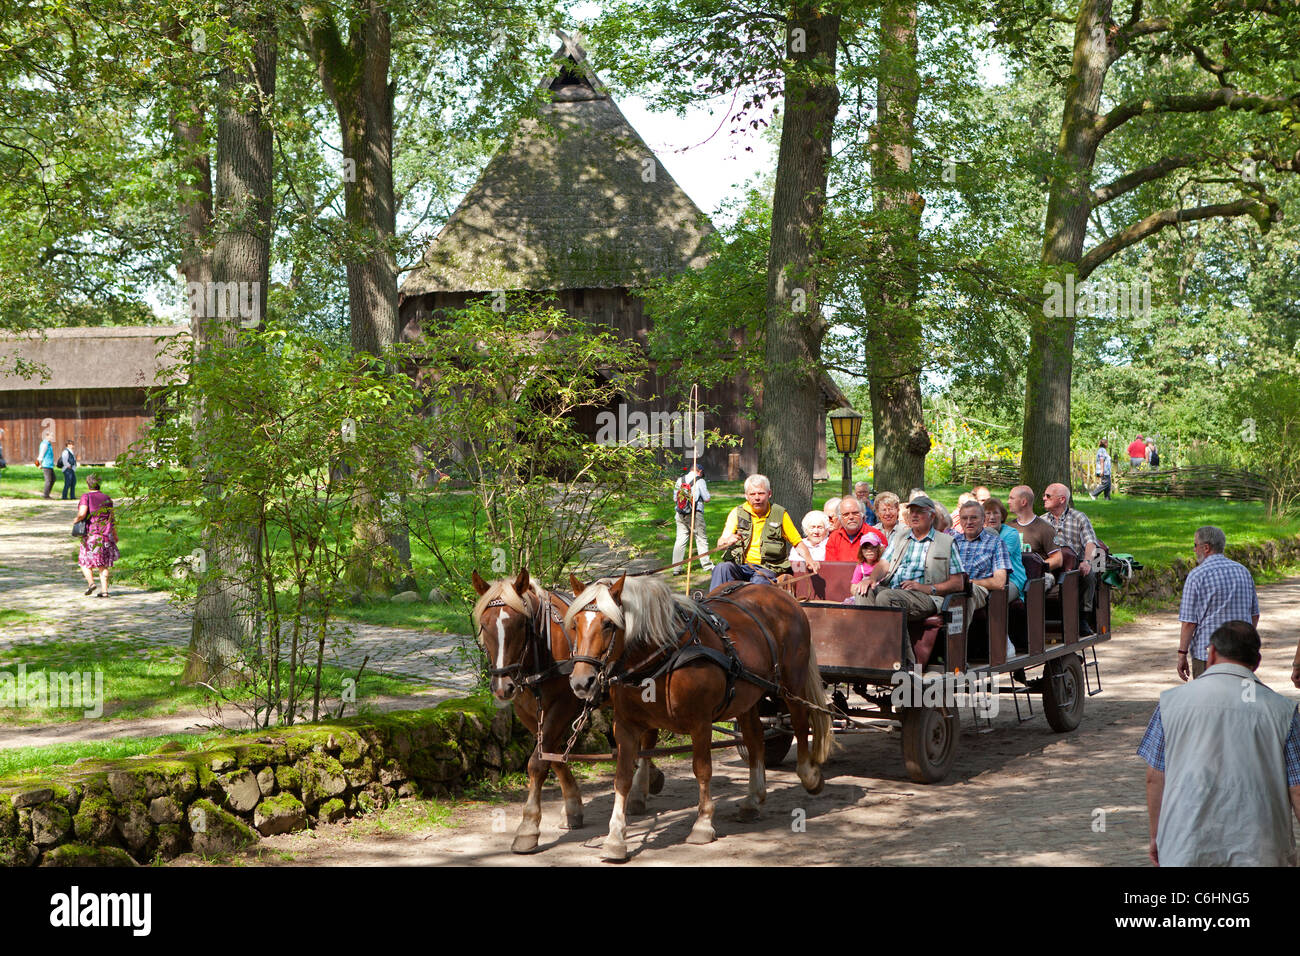 horse-drawn carriage, Wilsede, Luneburg Heath, Lower Saxony, Germany Stock Photo